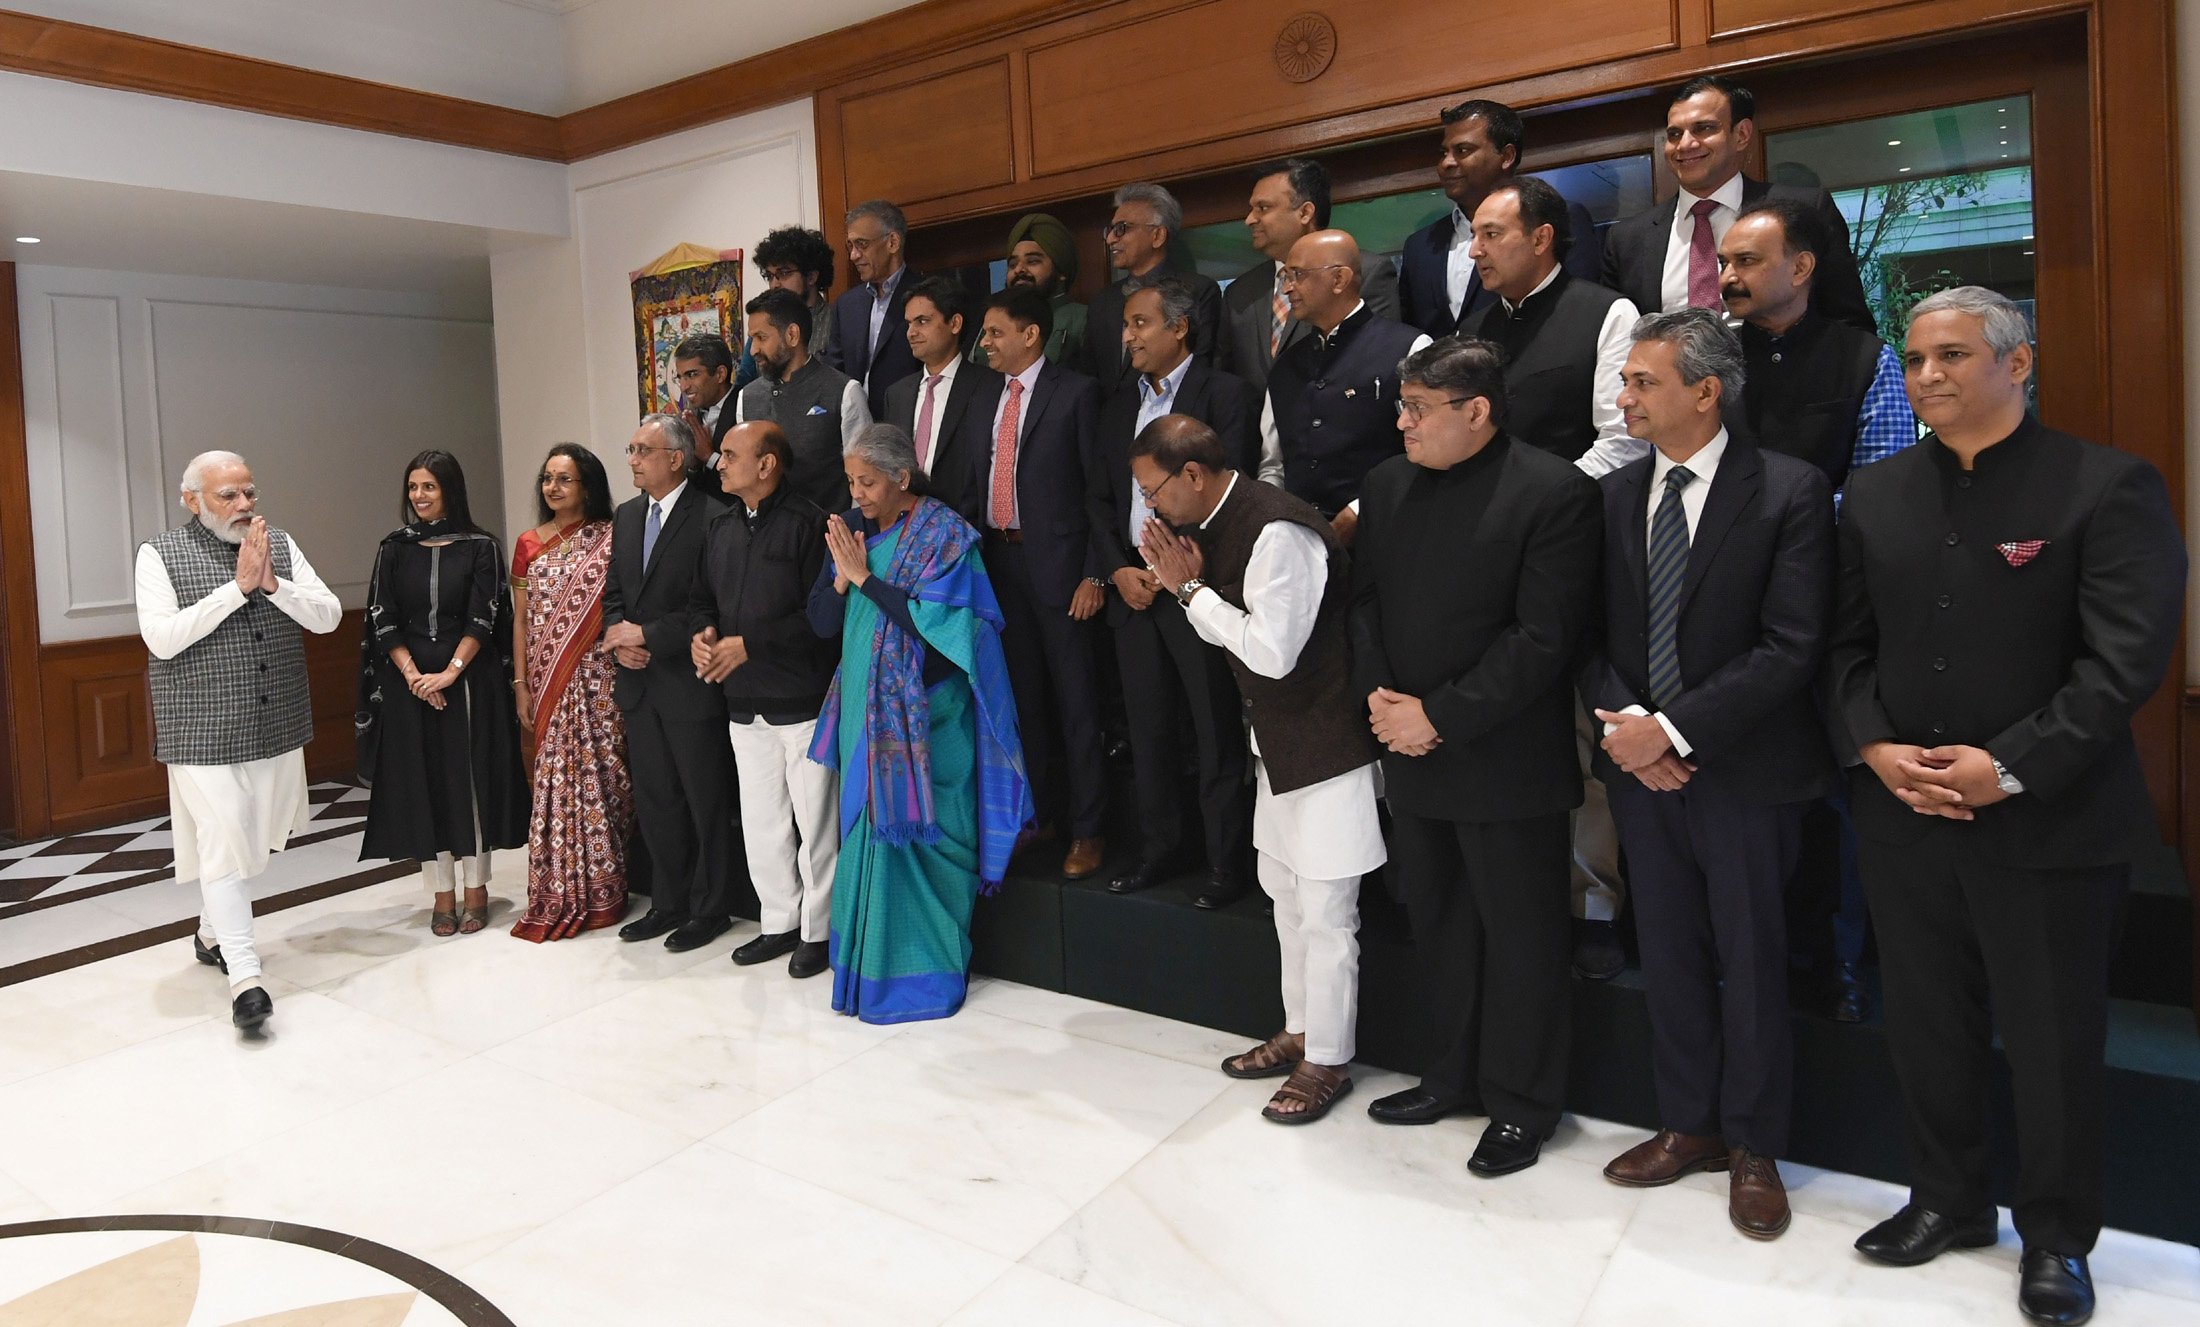 Prashant Prakash (second row, far right) meeting Indian Prime Minister Narendra Modi in the capital New Delhi on 17 December, 2021 (Indian government handout)